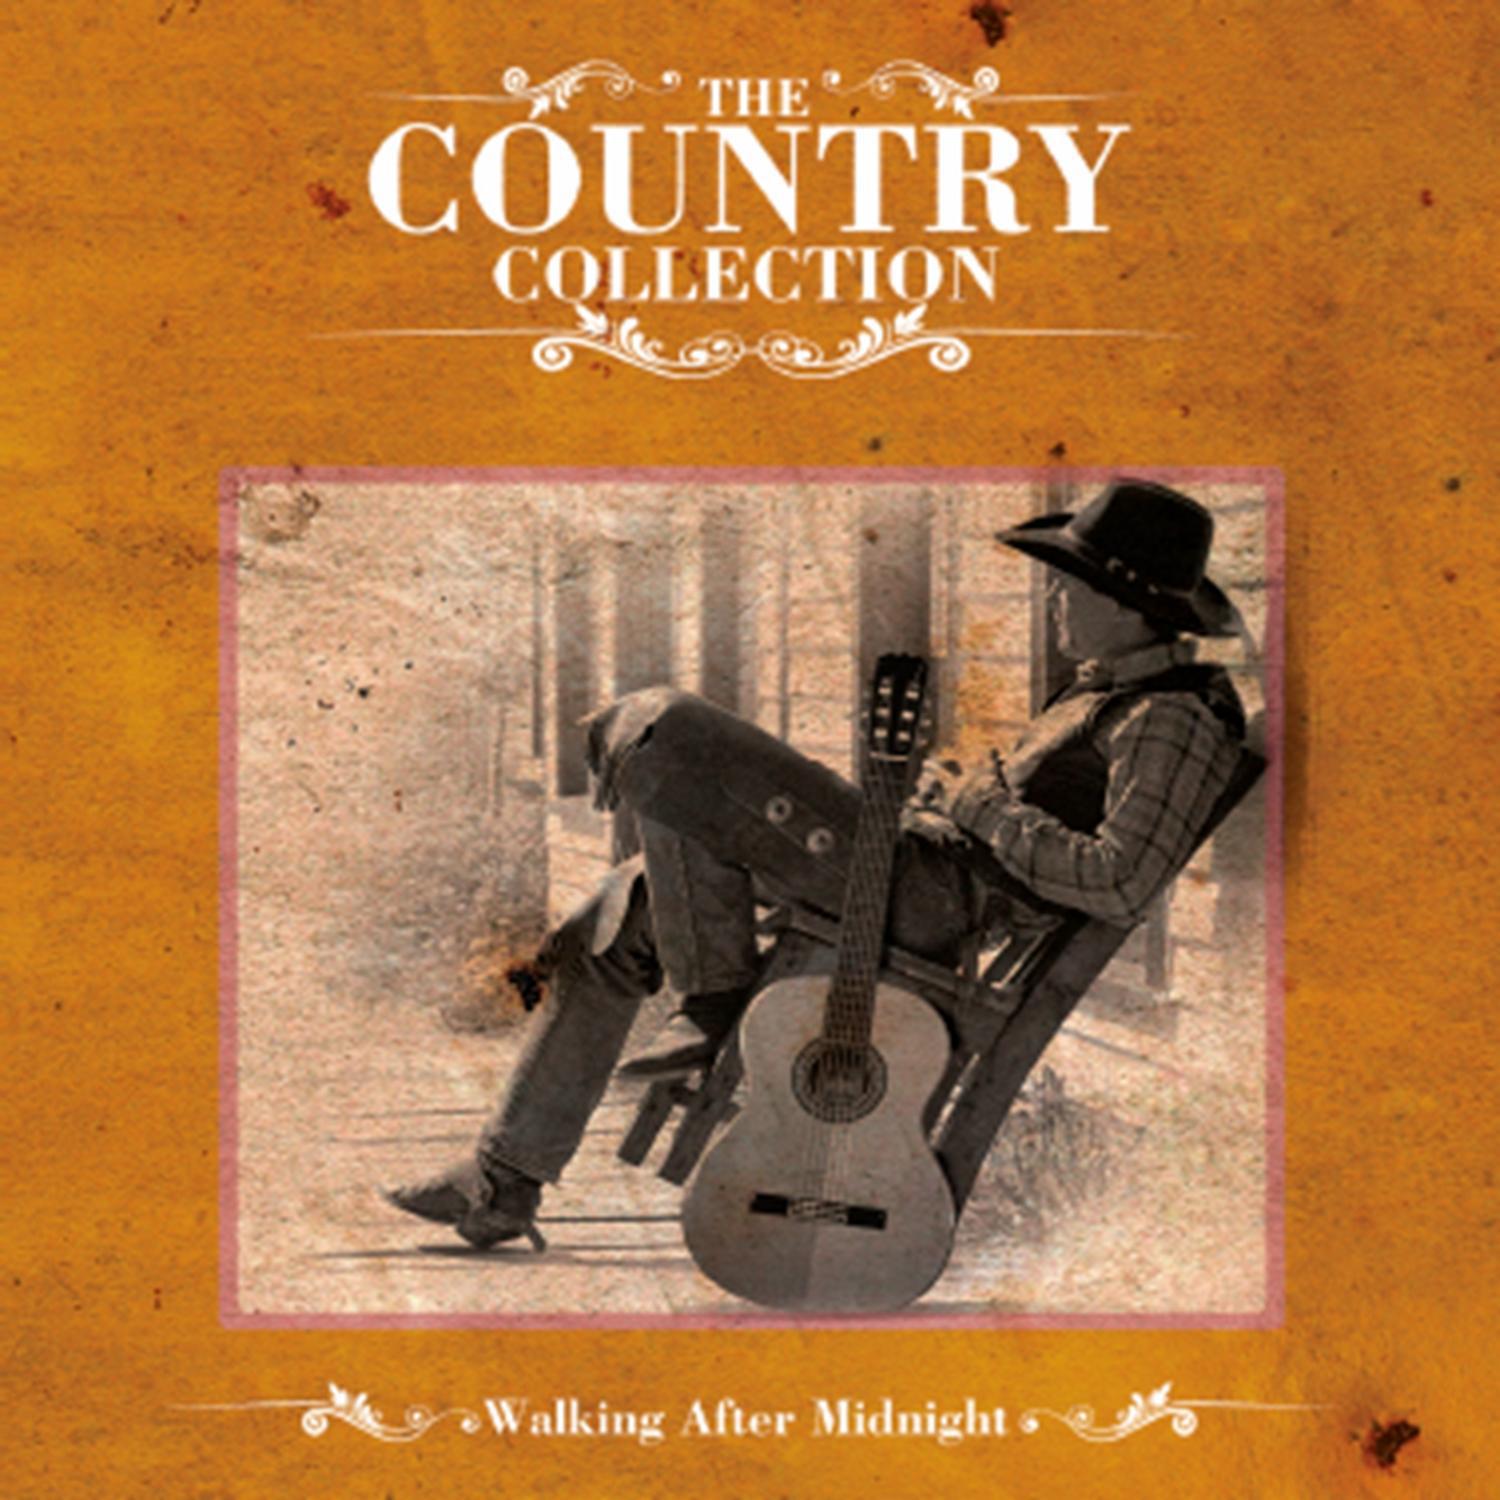 The Country Collection - Walking After Midnight